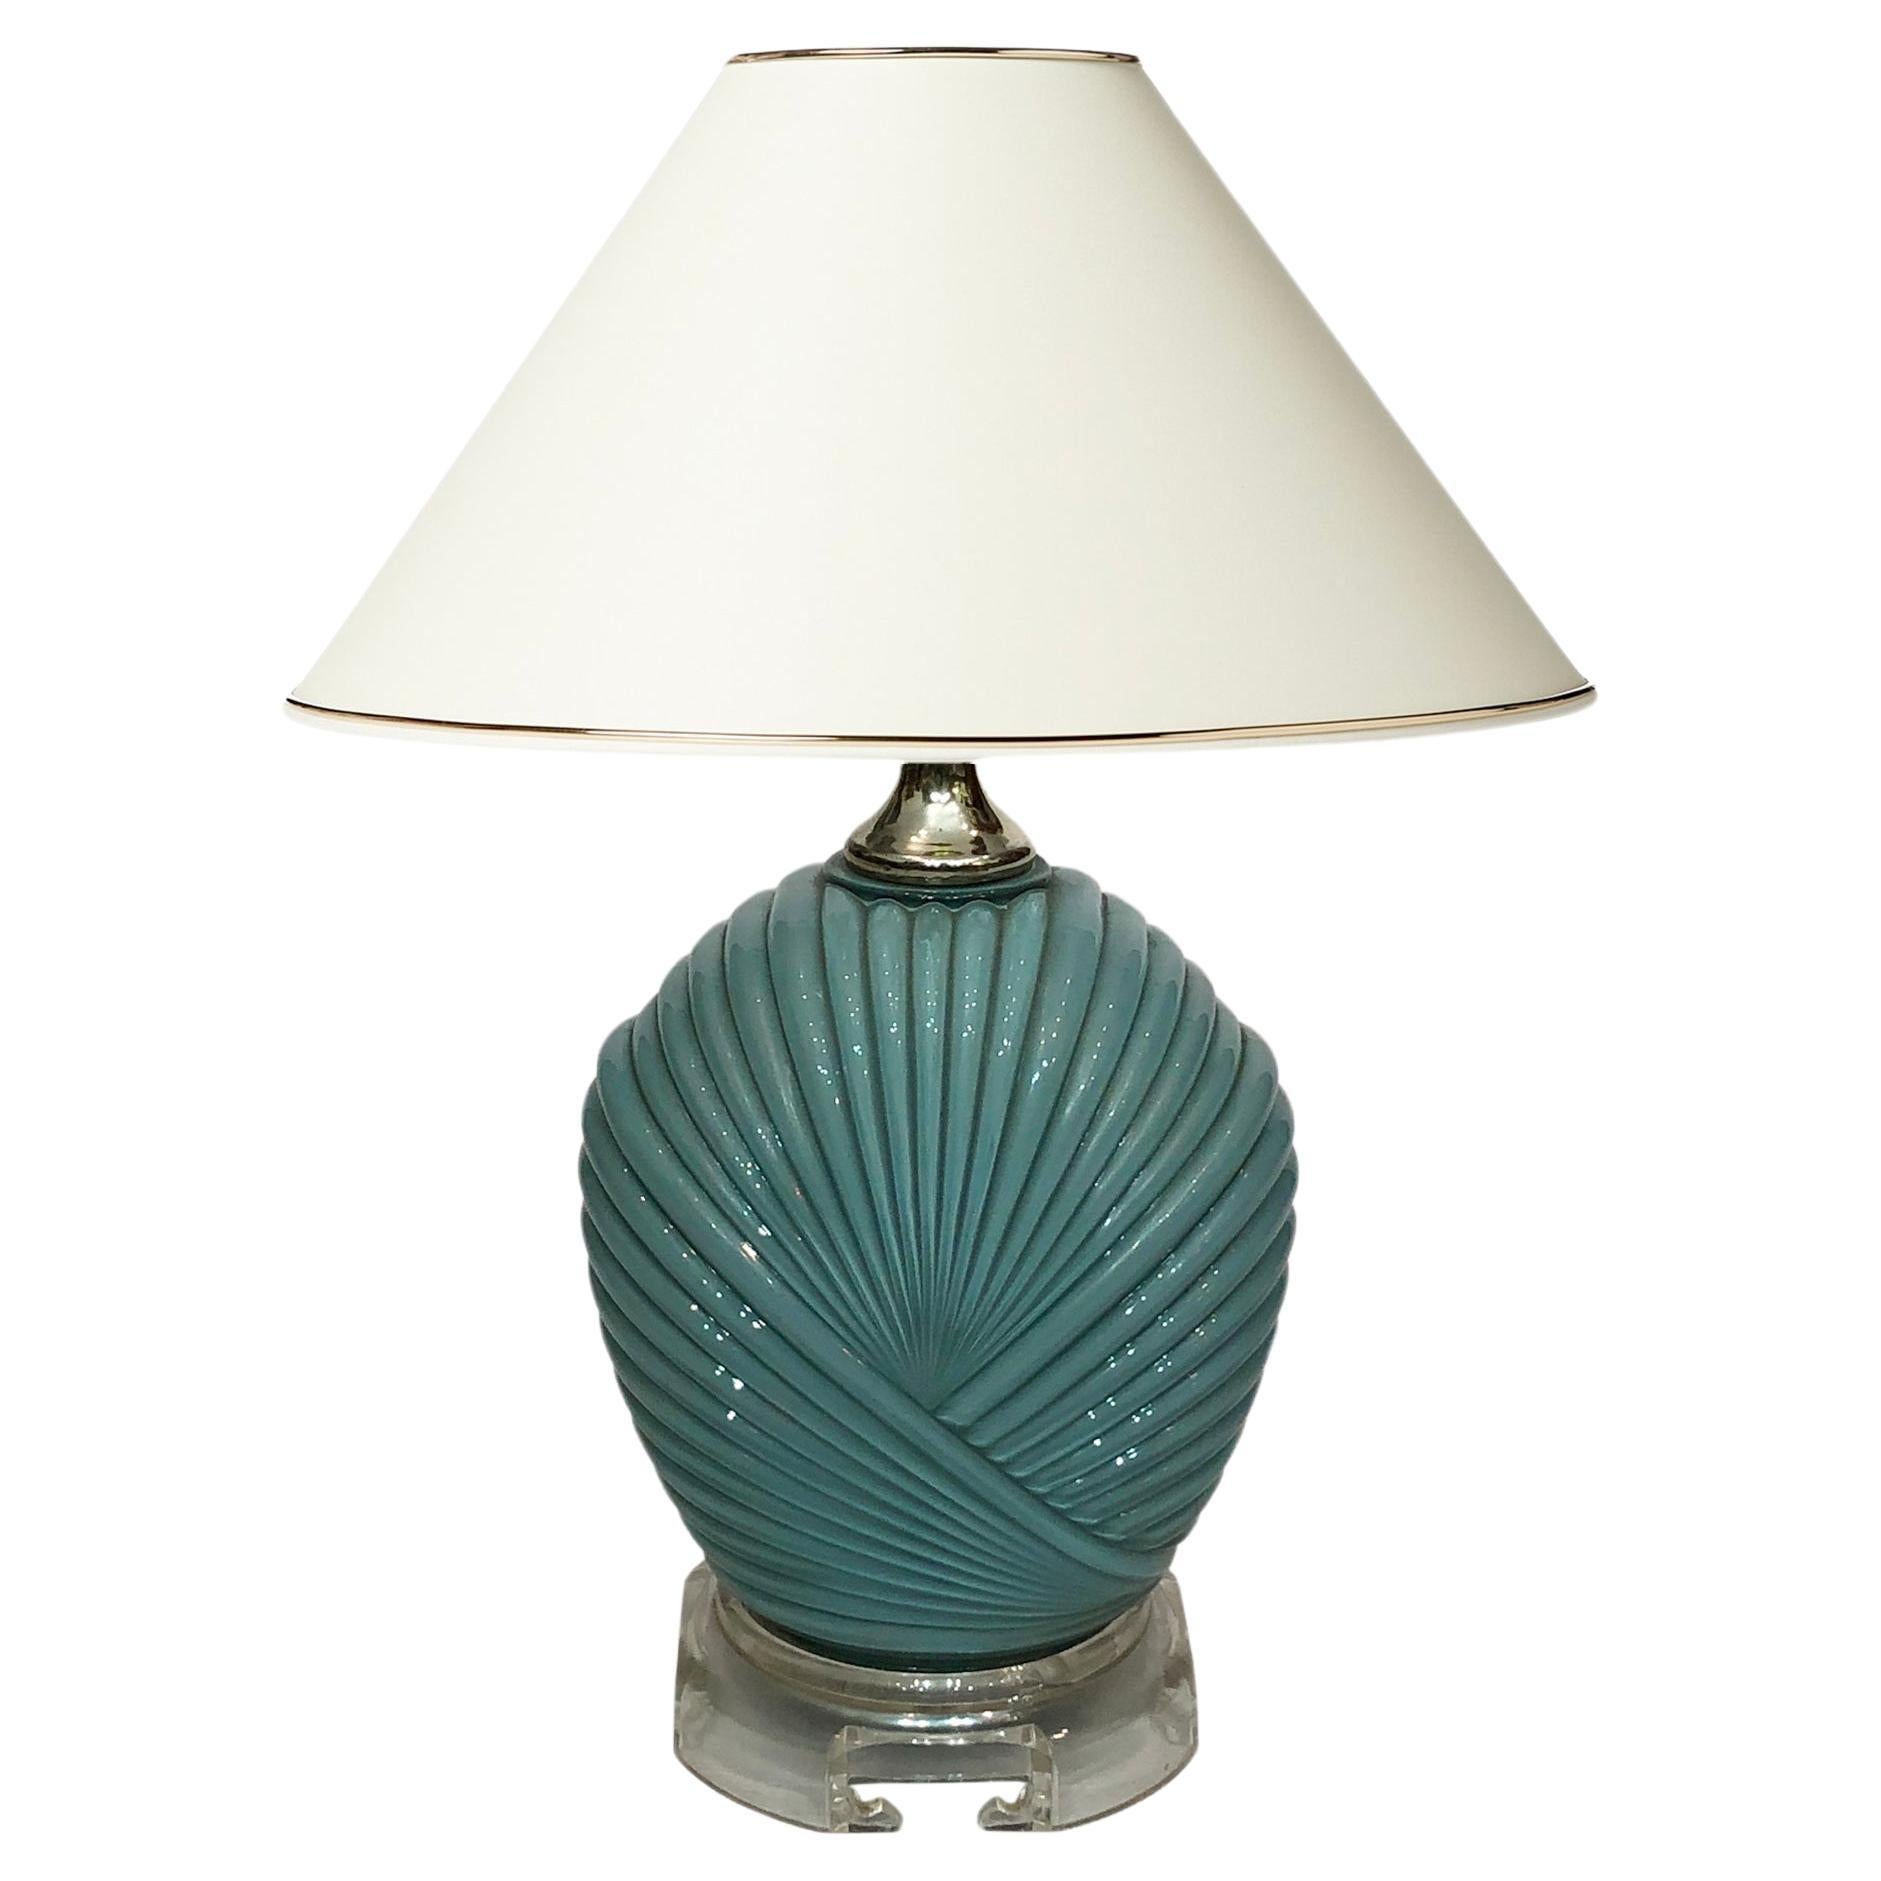 Dusty Blue Candy Table Lamp Turquoise 1970s Hollywood Regency Midcentury Vintage